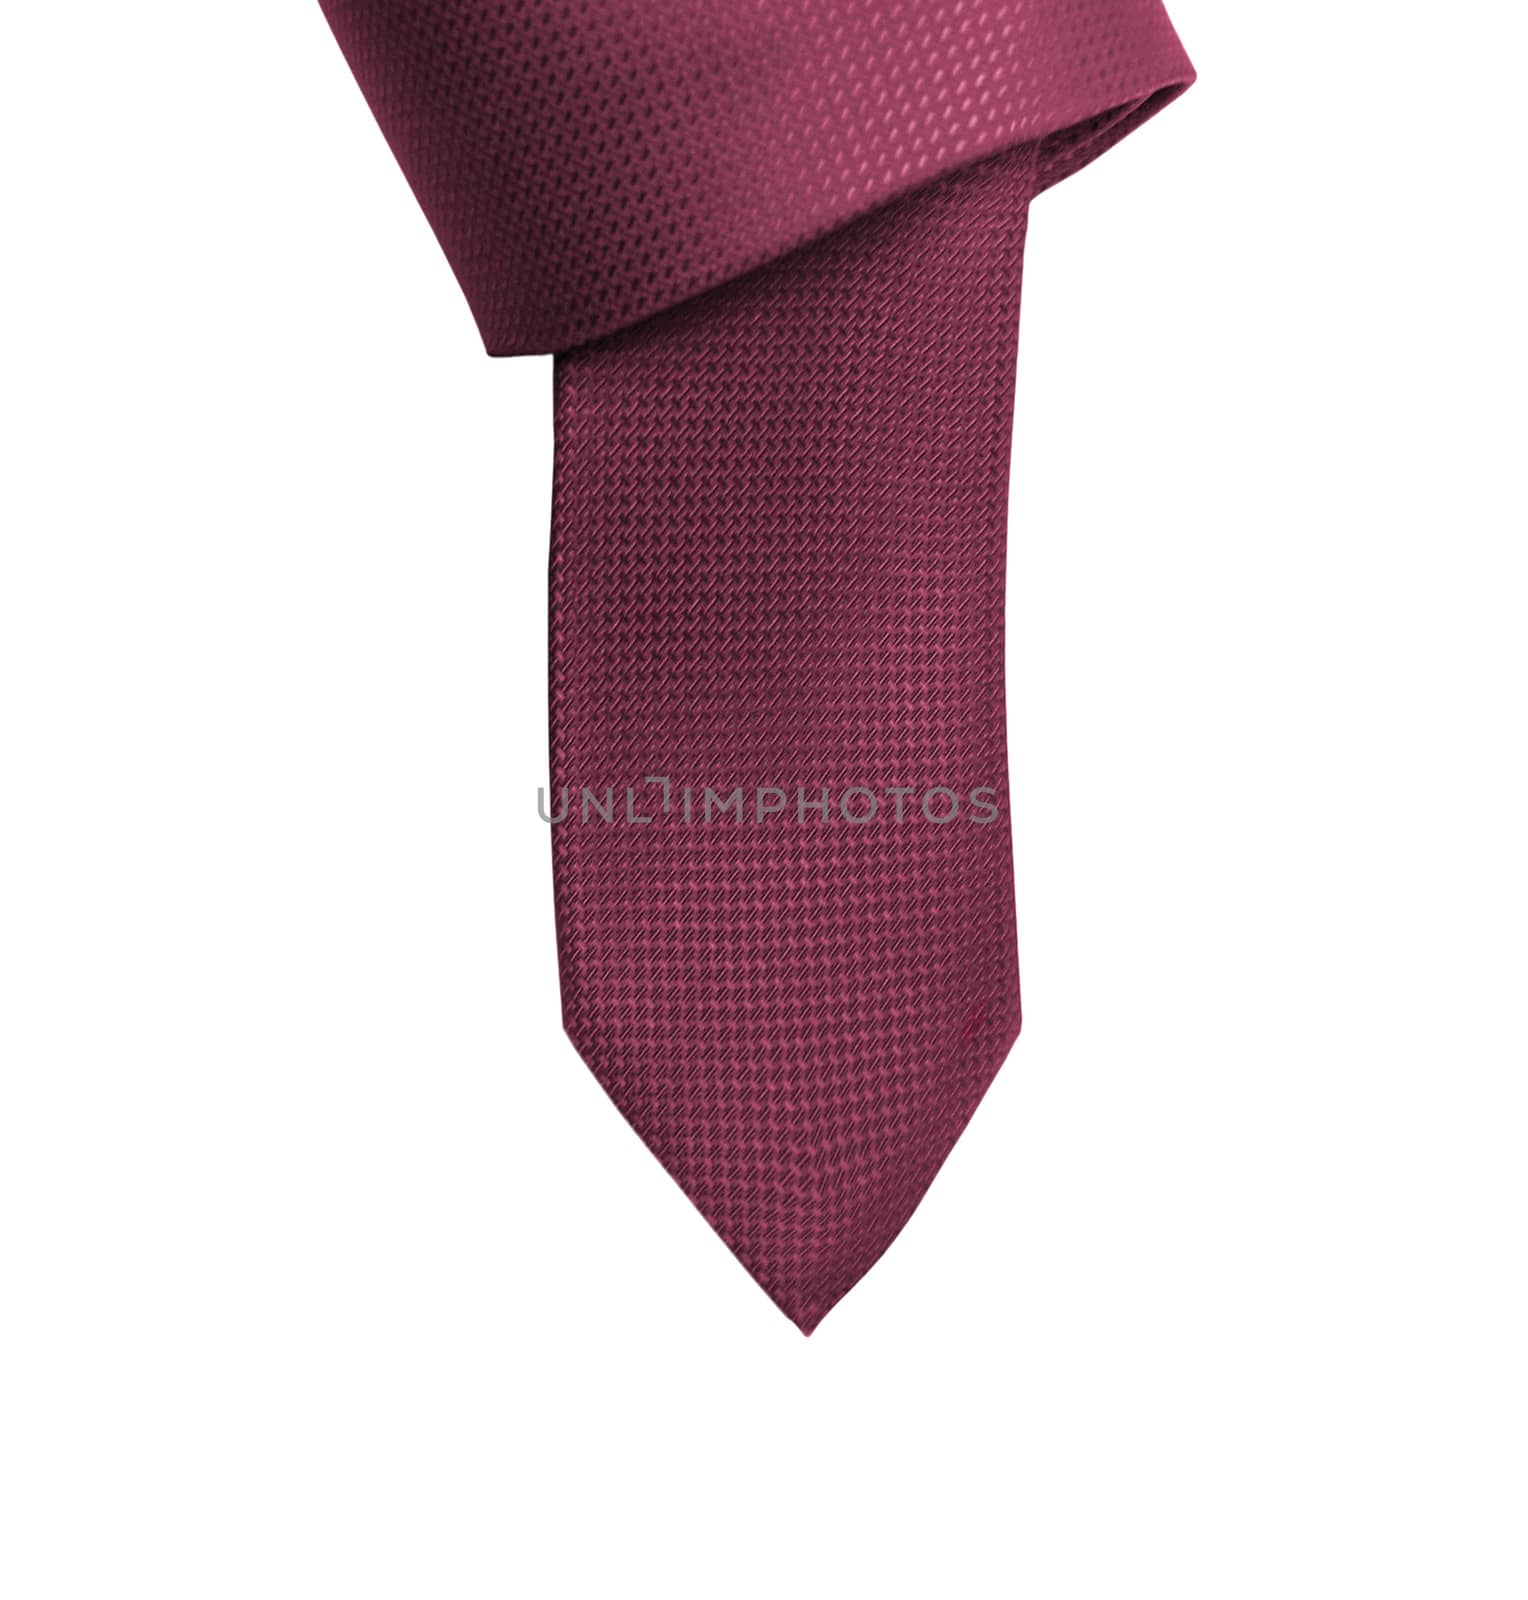 red tie close up on white background by ozaiachin